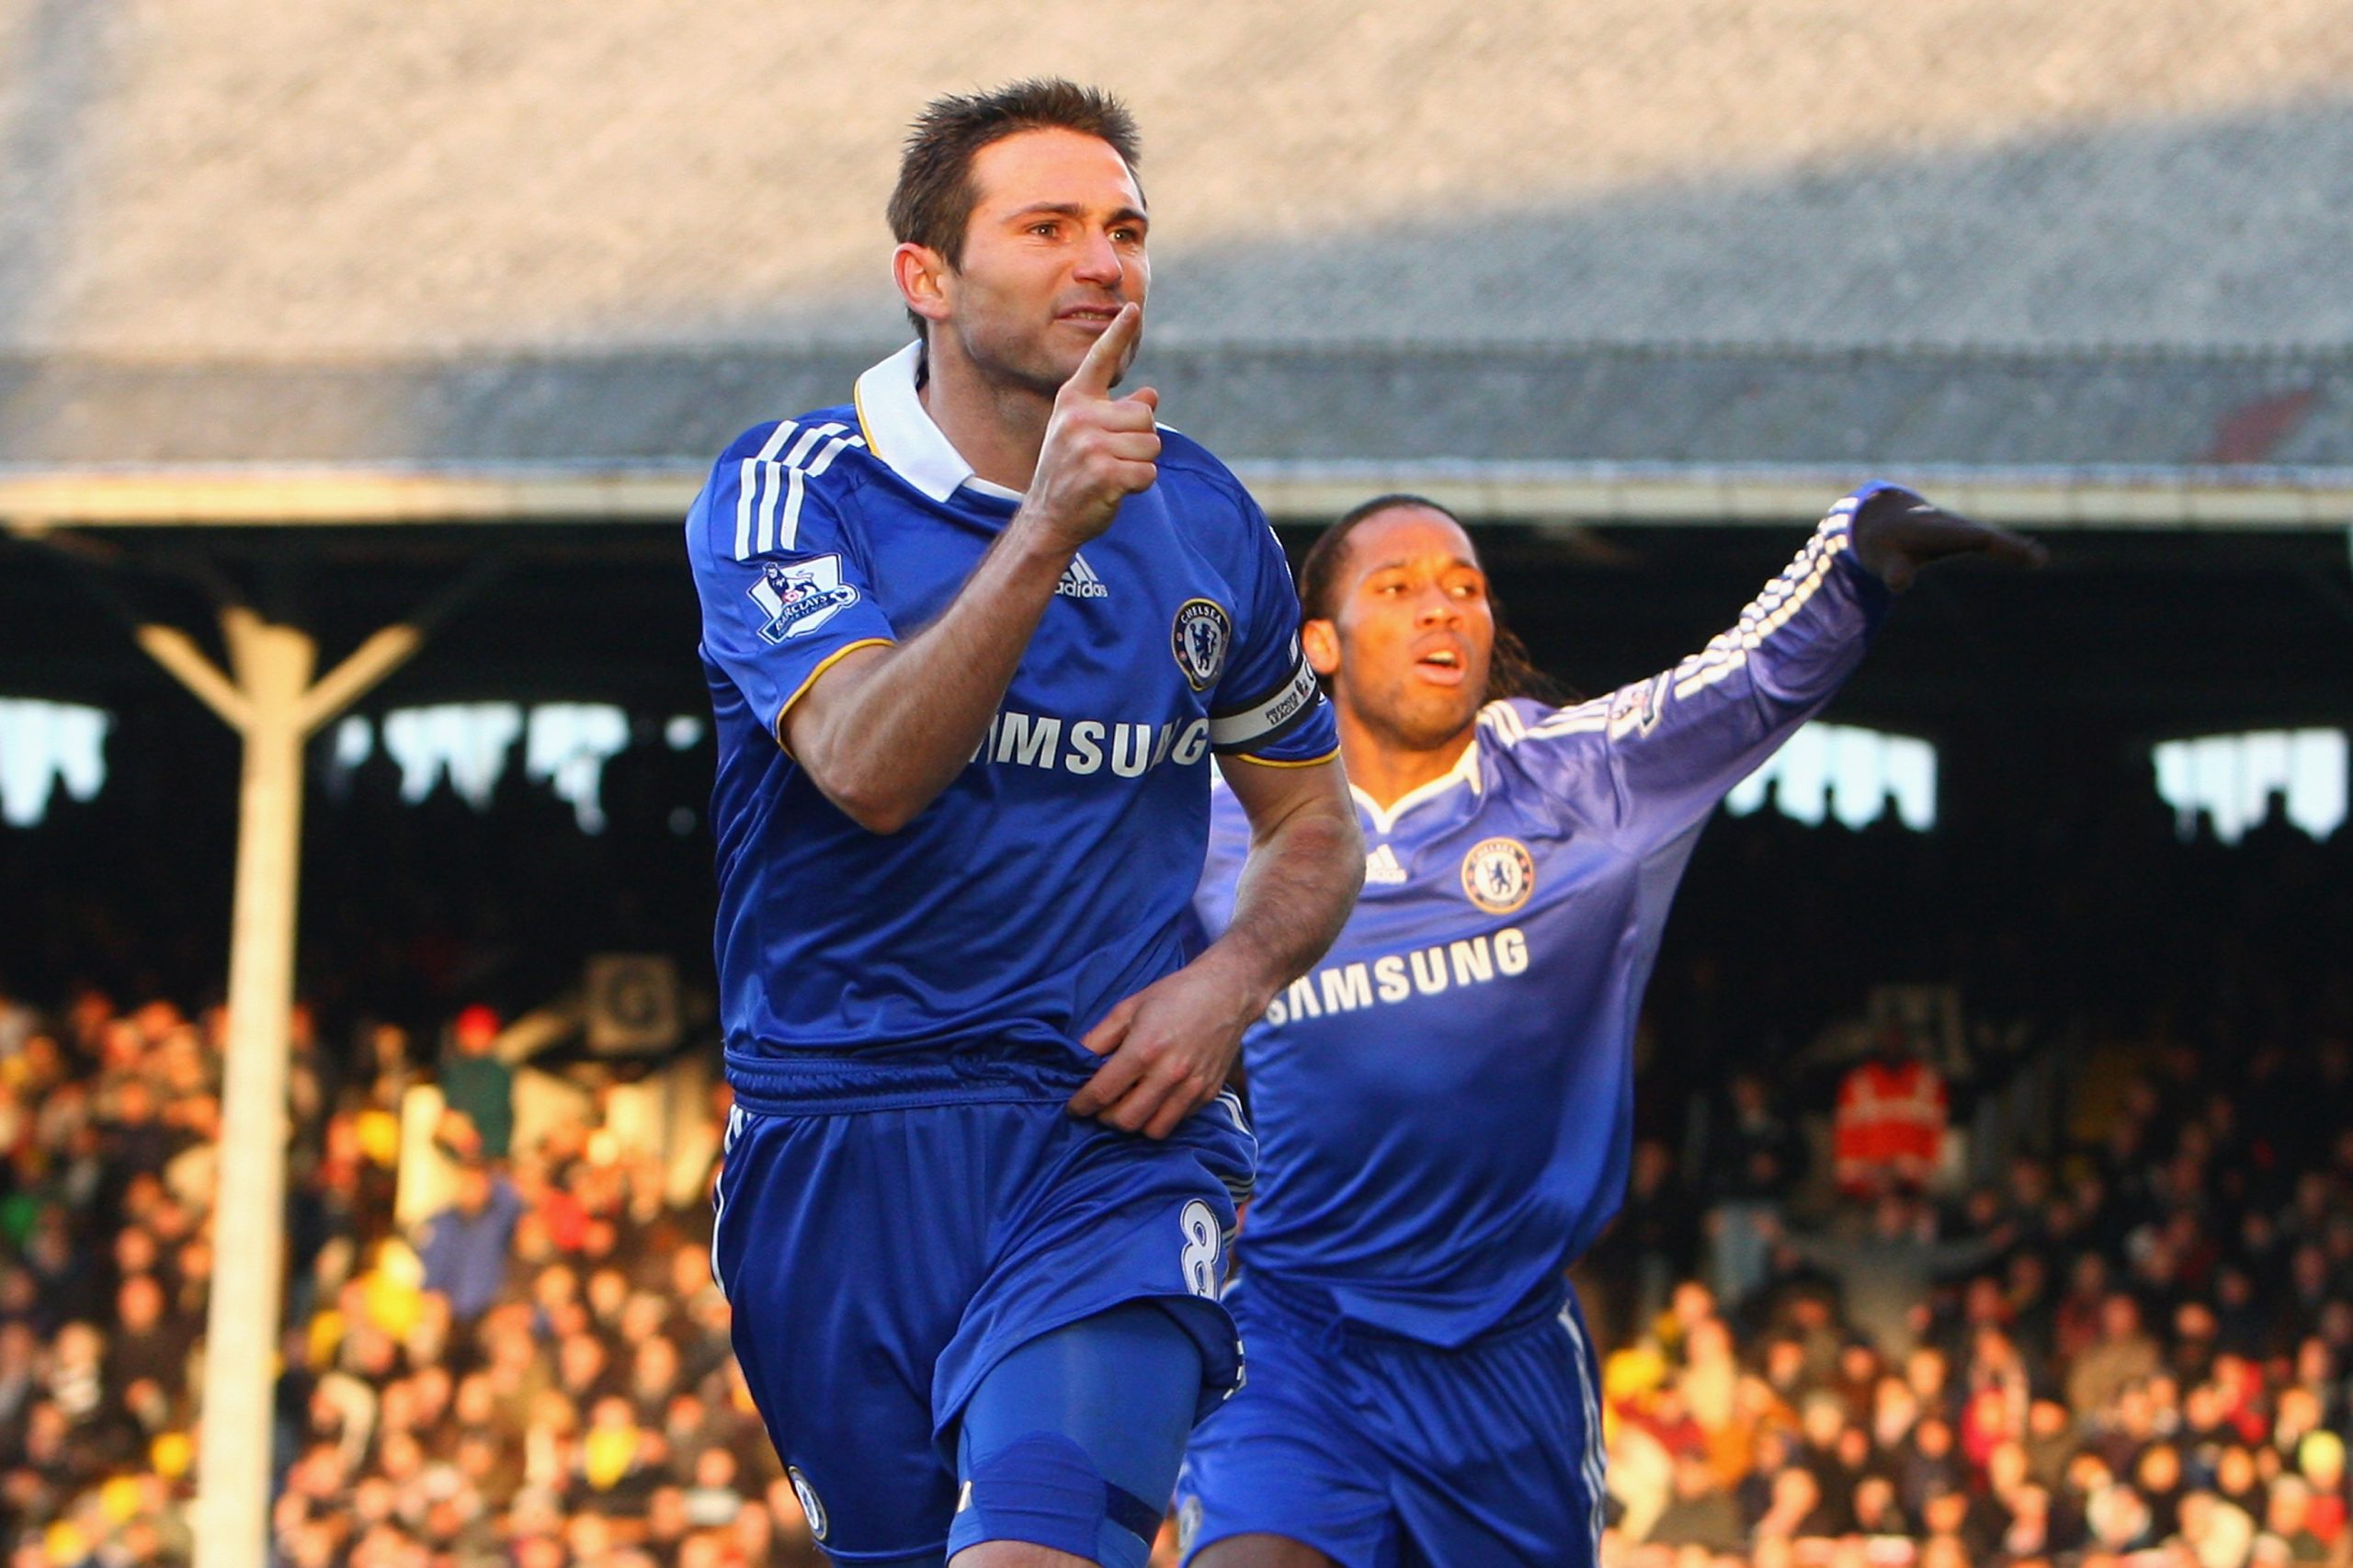 Frank Lampard (L) of Chelsea and teammate Didier Drogba celebrate after scoring a goal against Fulham - 2008.